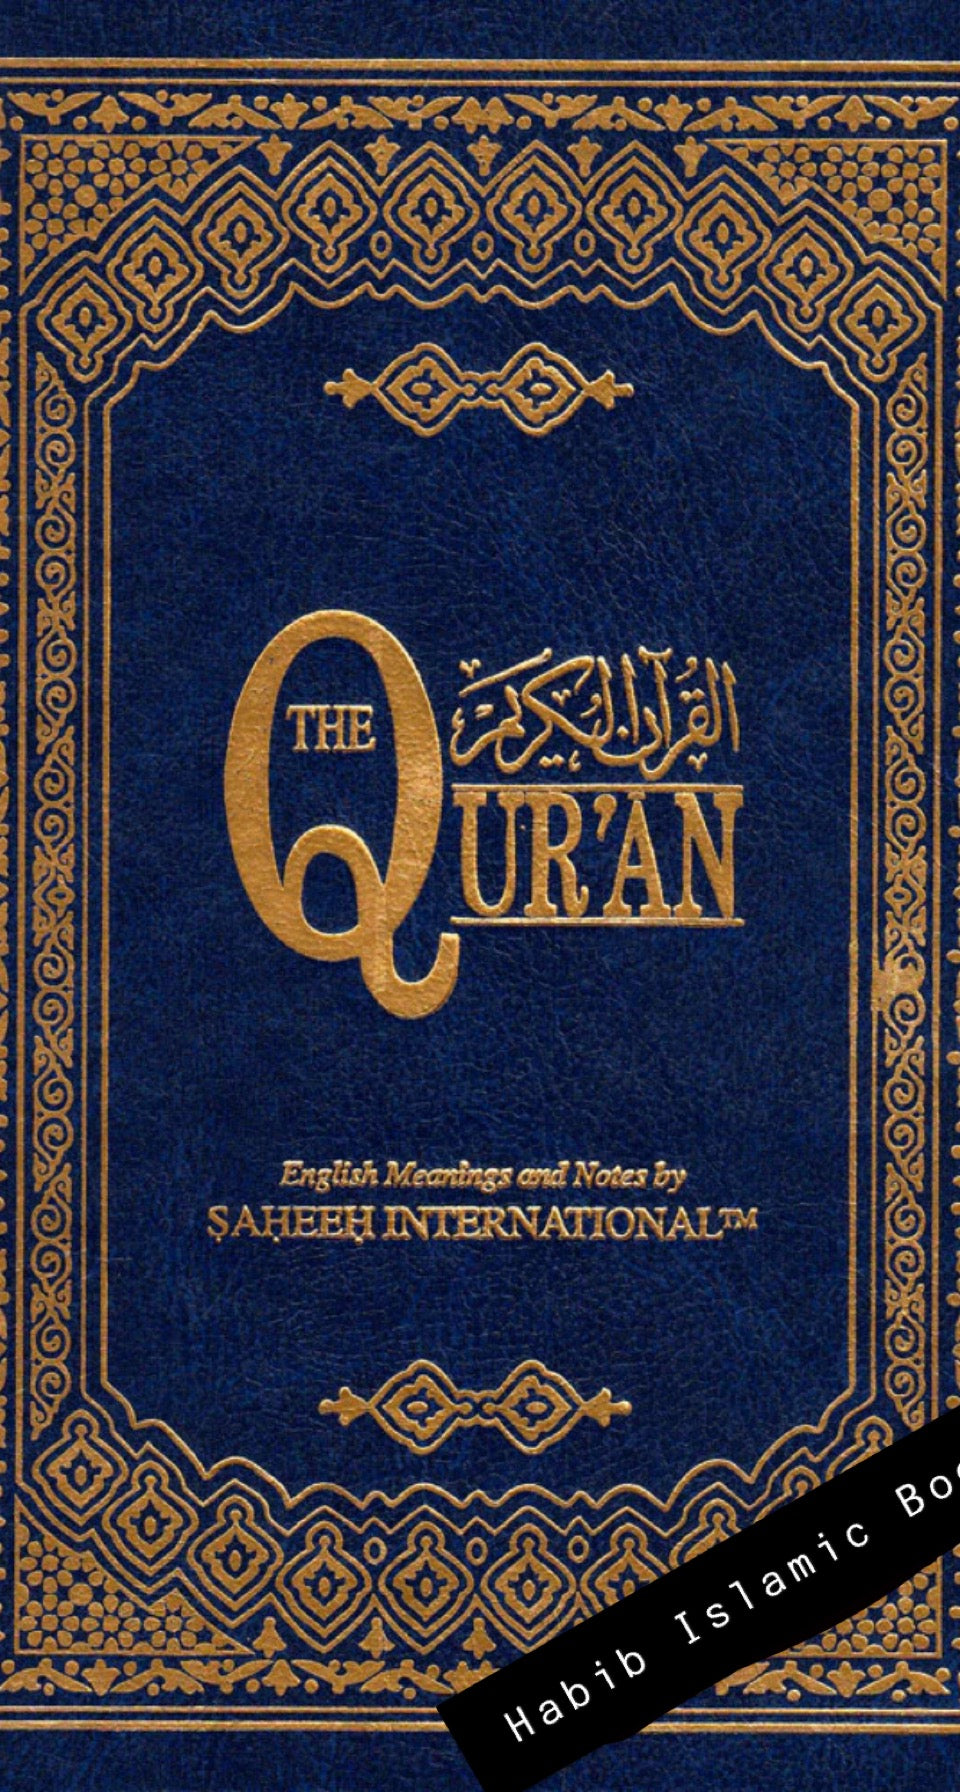 The Qur'an - English Meanings and Notes by Saheeh International (Arabic & English)